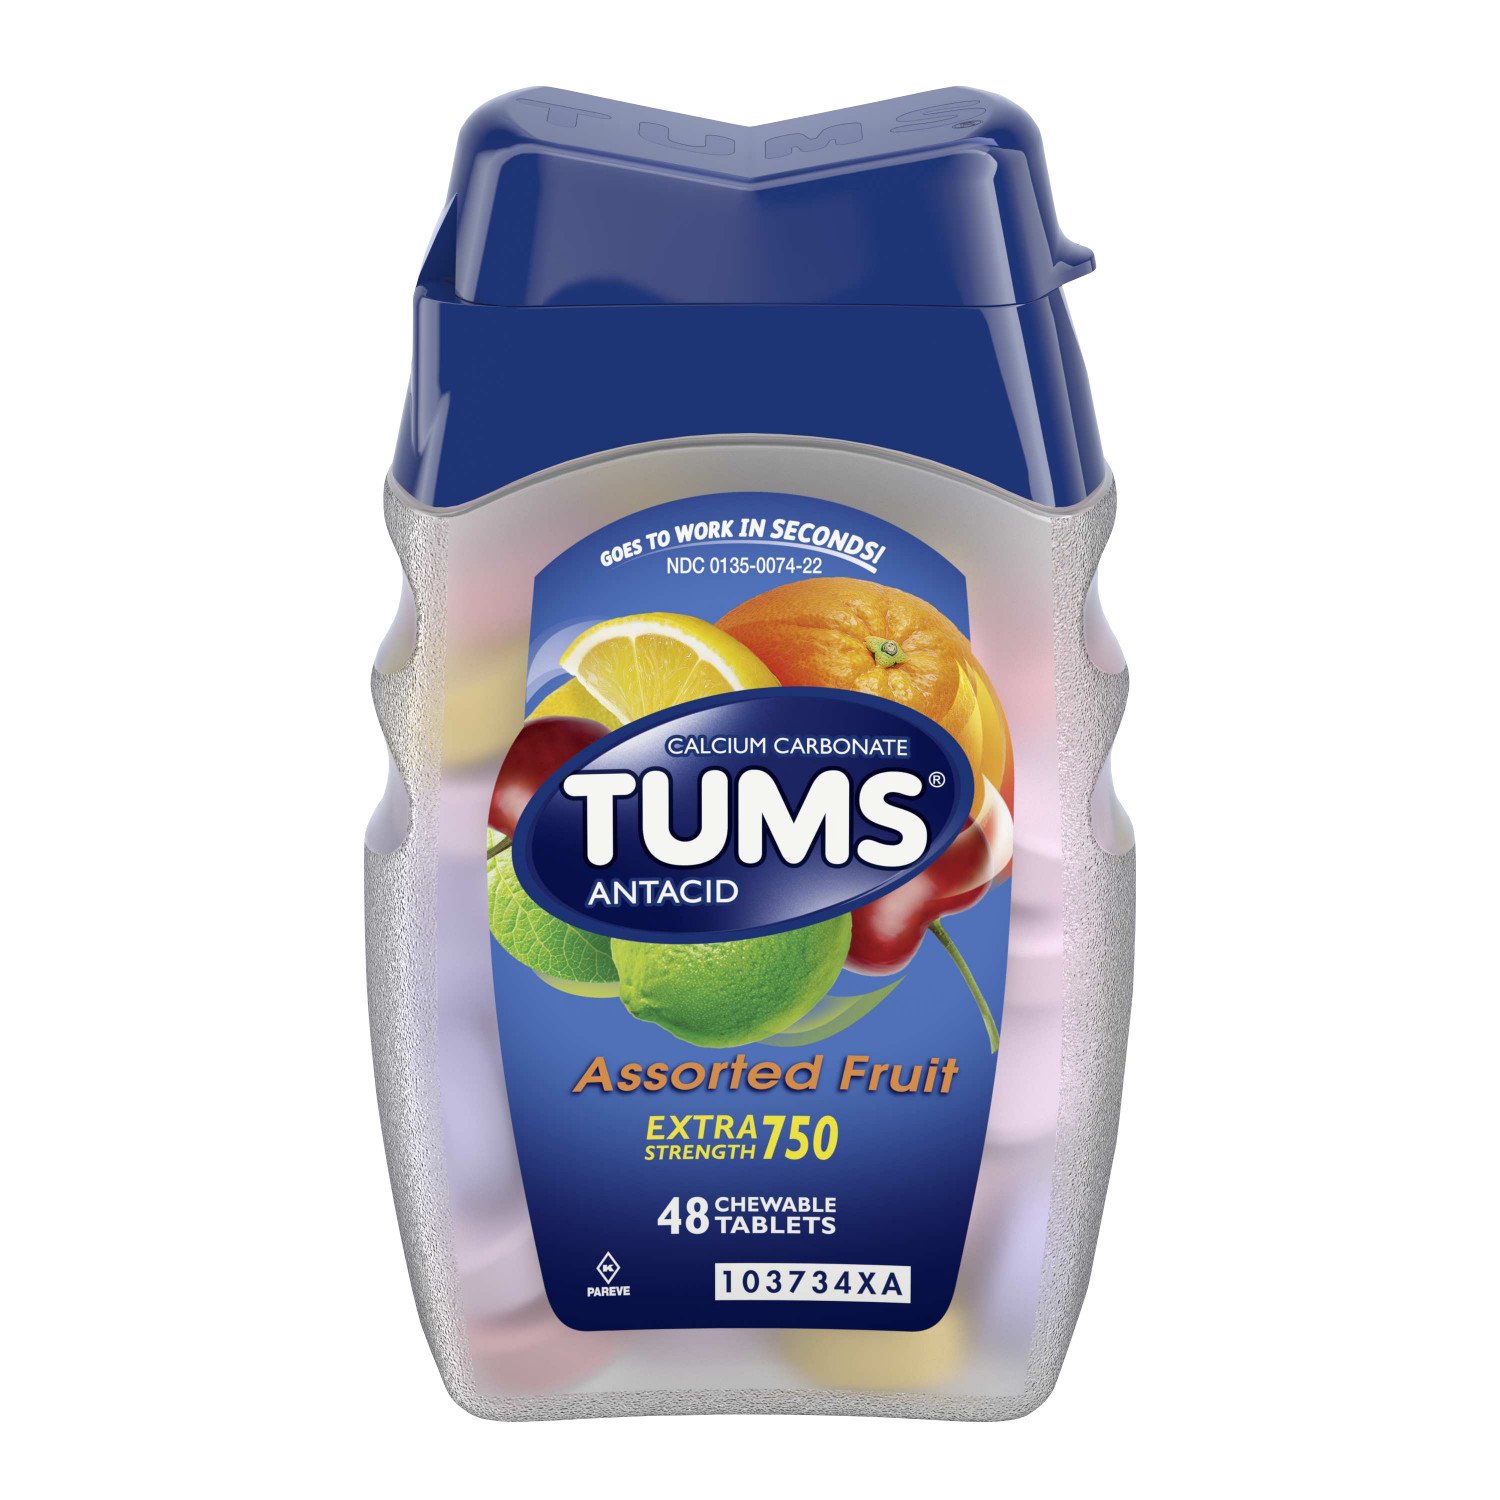 (2 Pack) Tums antacid chewable tablets for heartburn ...